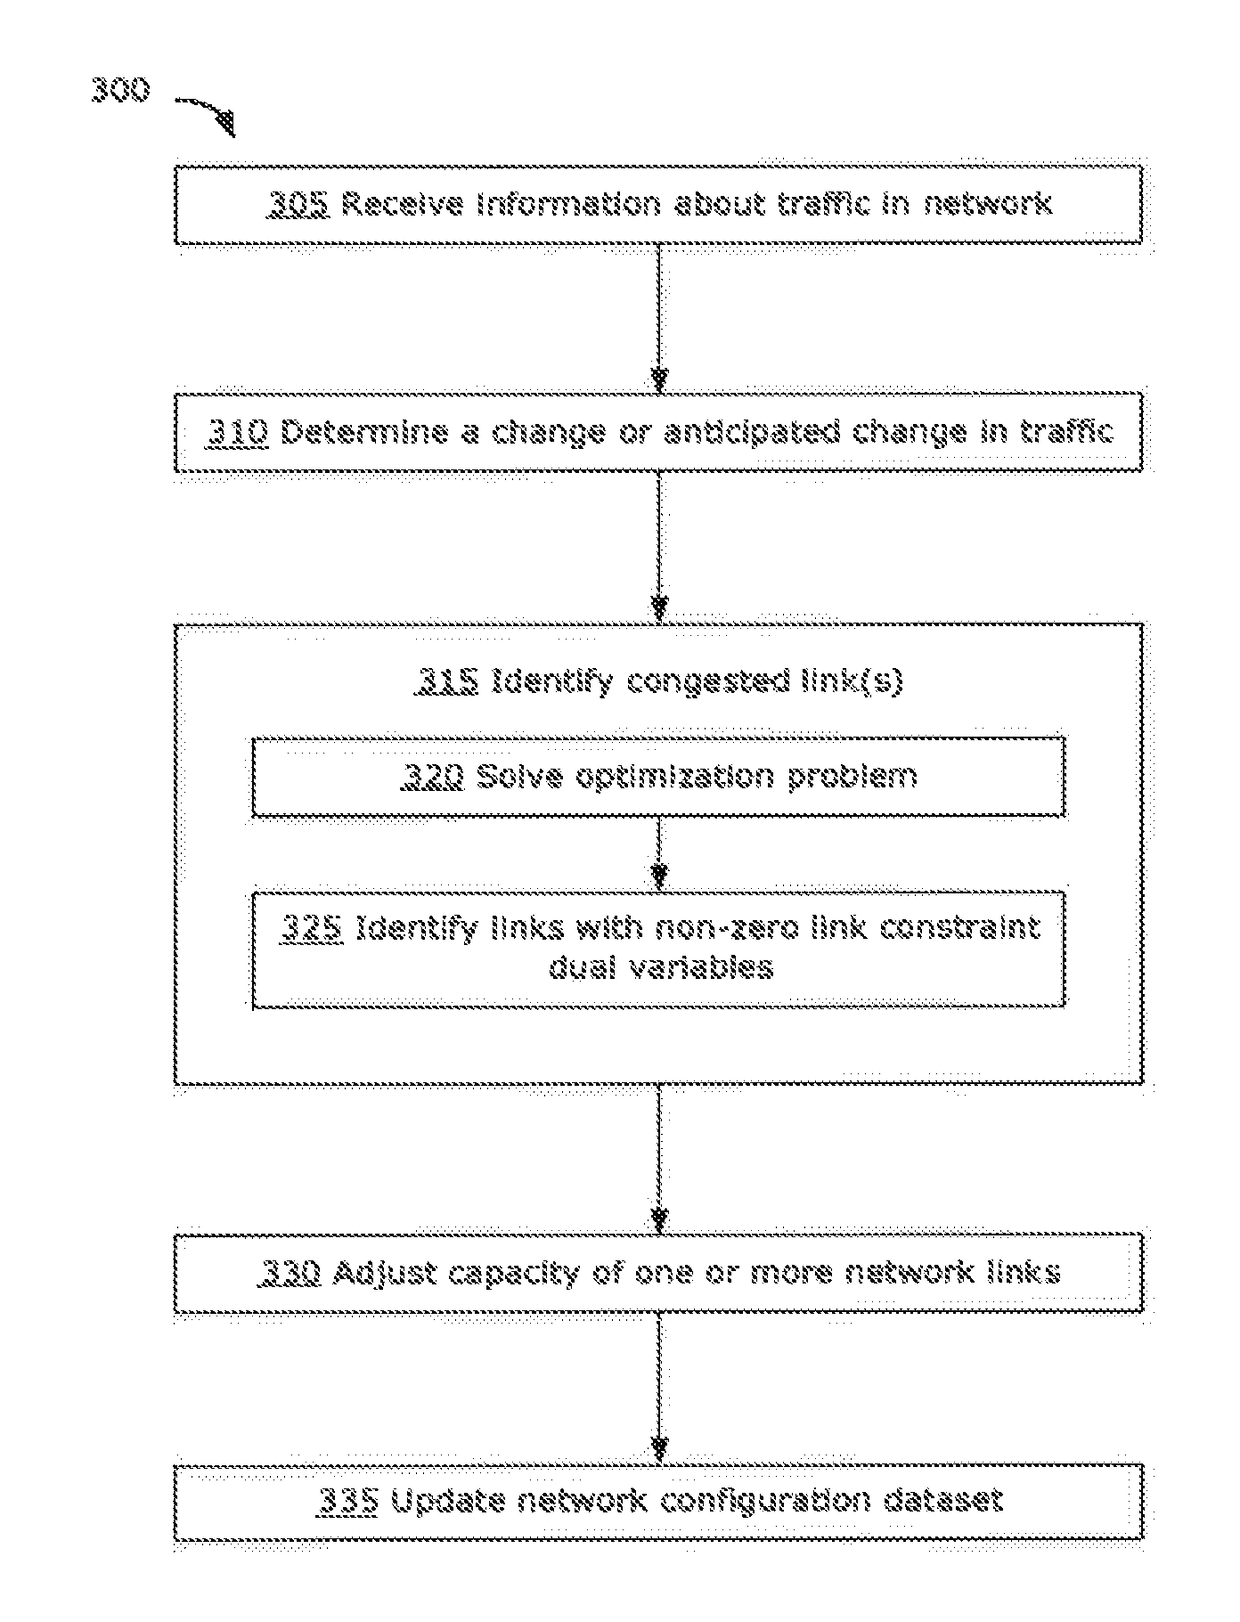 Methods and systems for transport SDN traffic engineering using dual variables